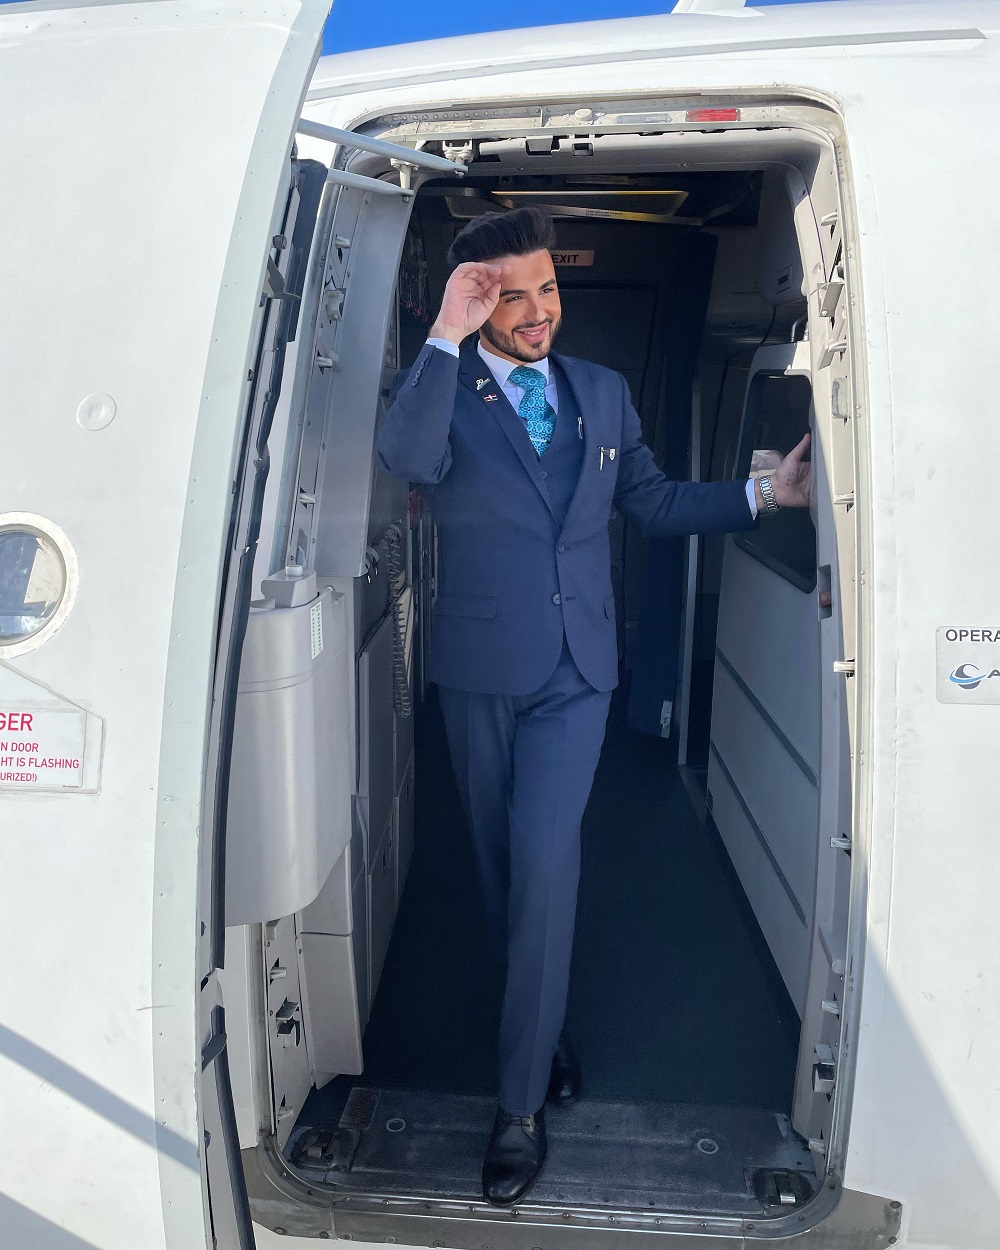 Sizzling Caribbean vibes through the eyes of Avion Express’ cabin crew